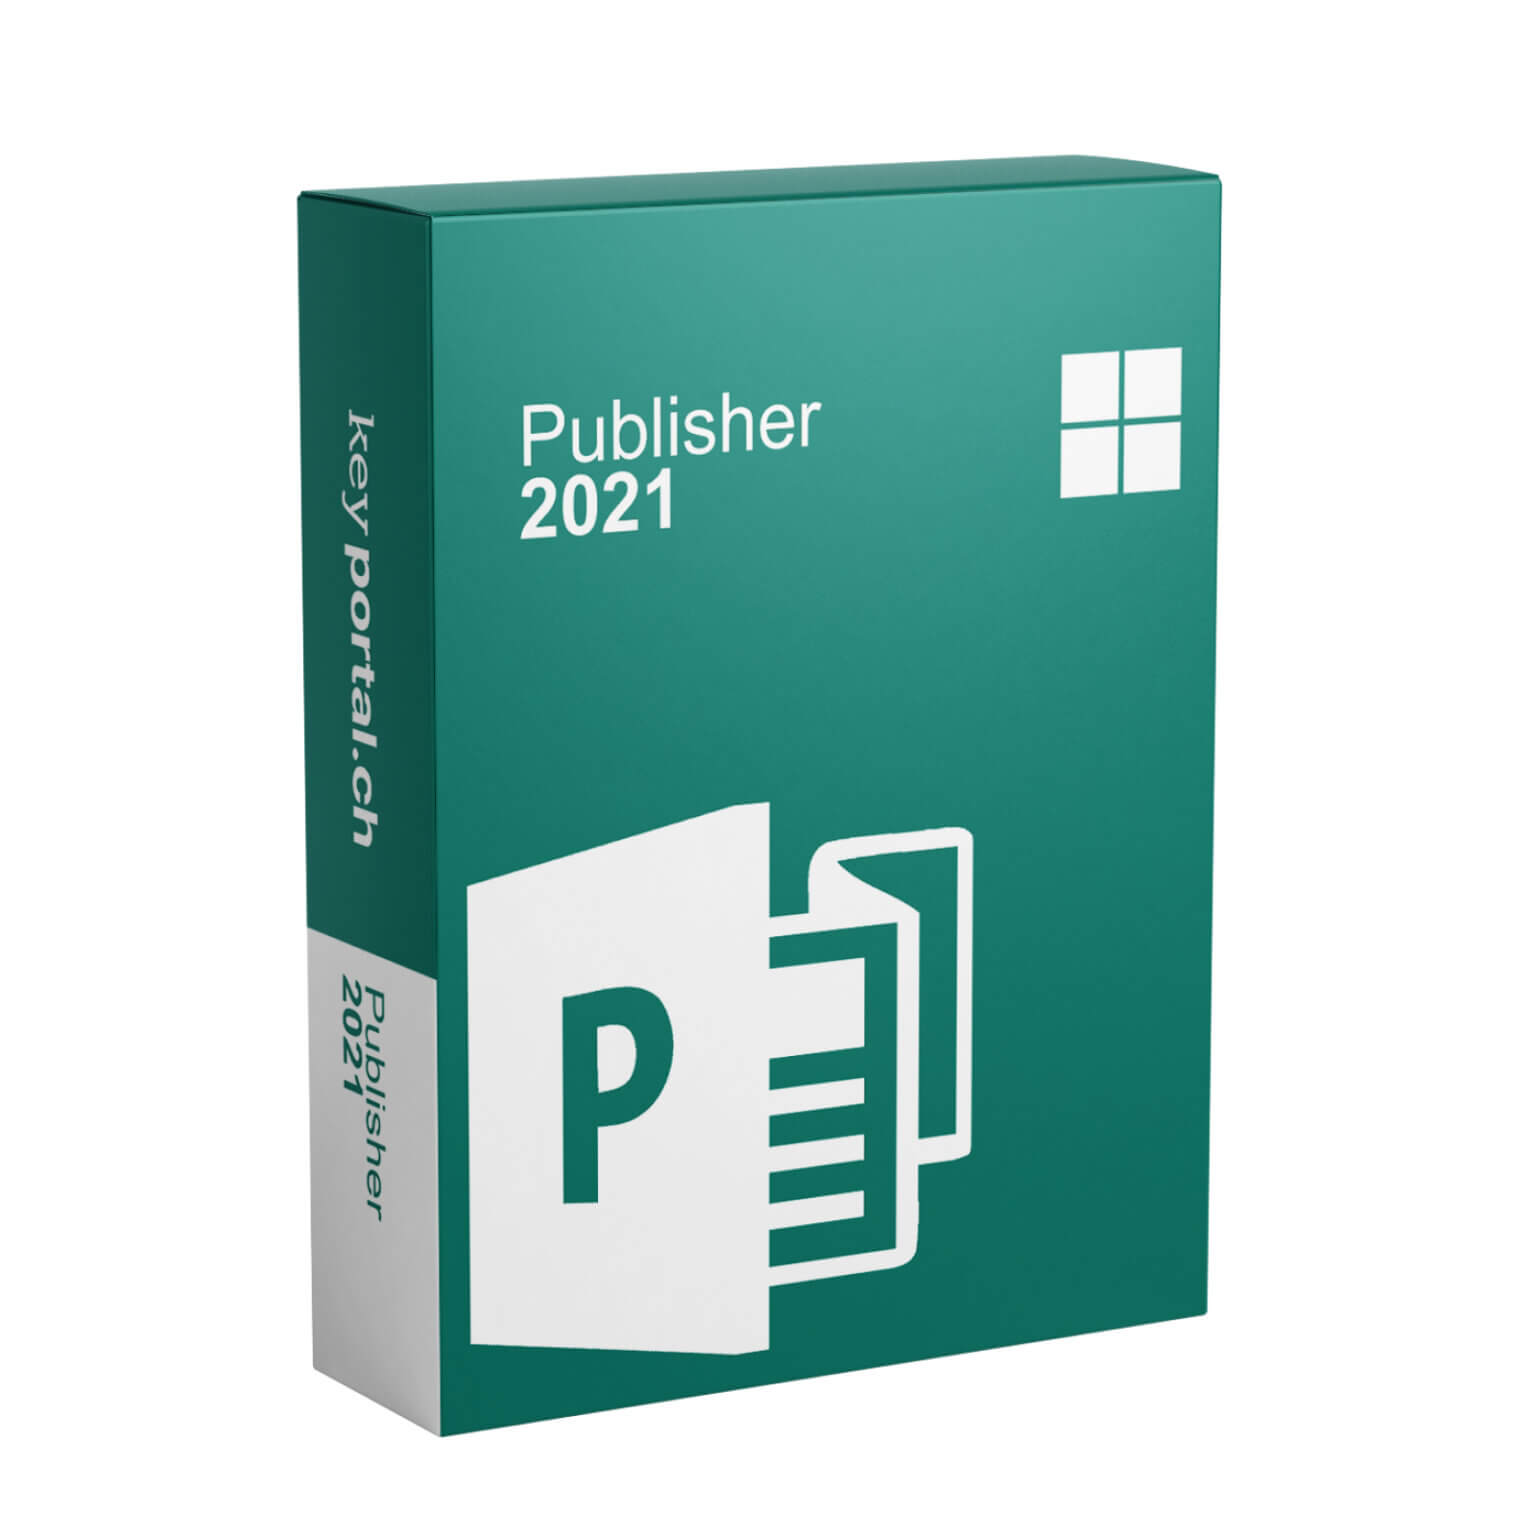 Microsoft Office Publisher 2021 download the new for windows